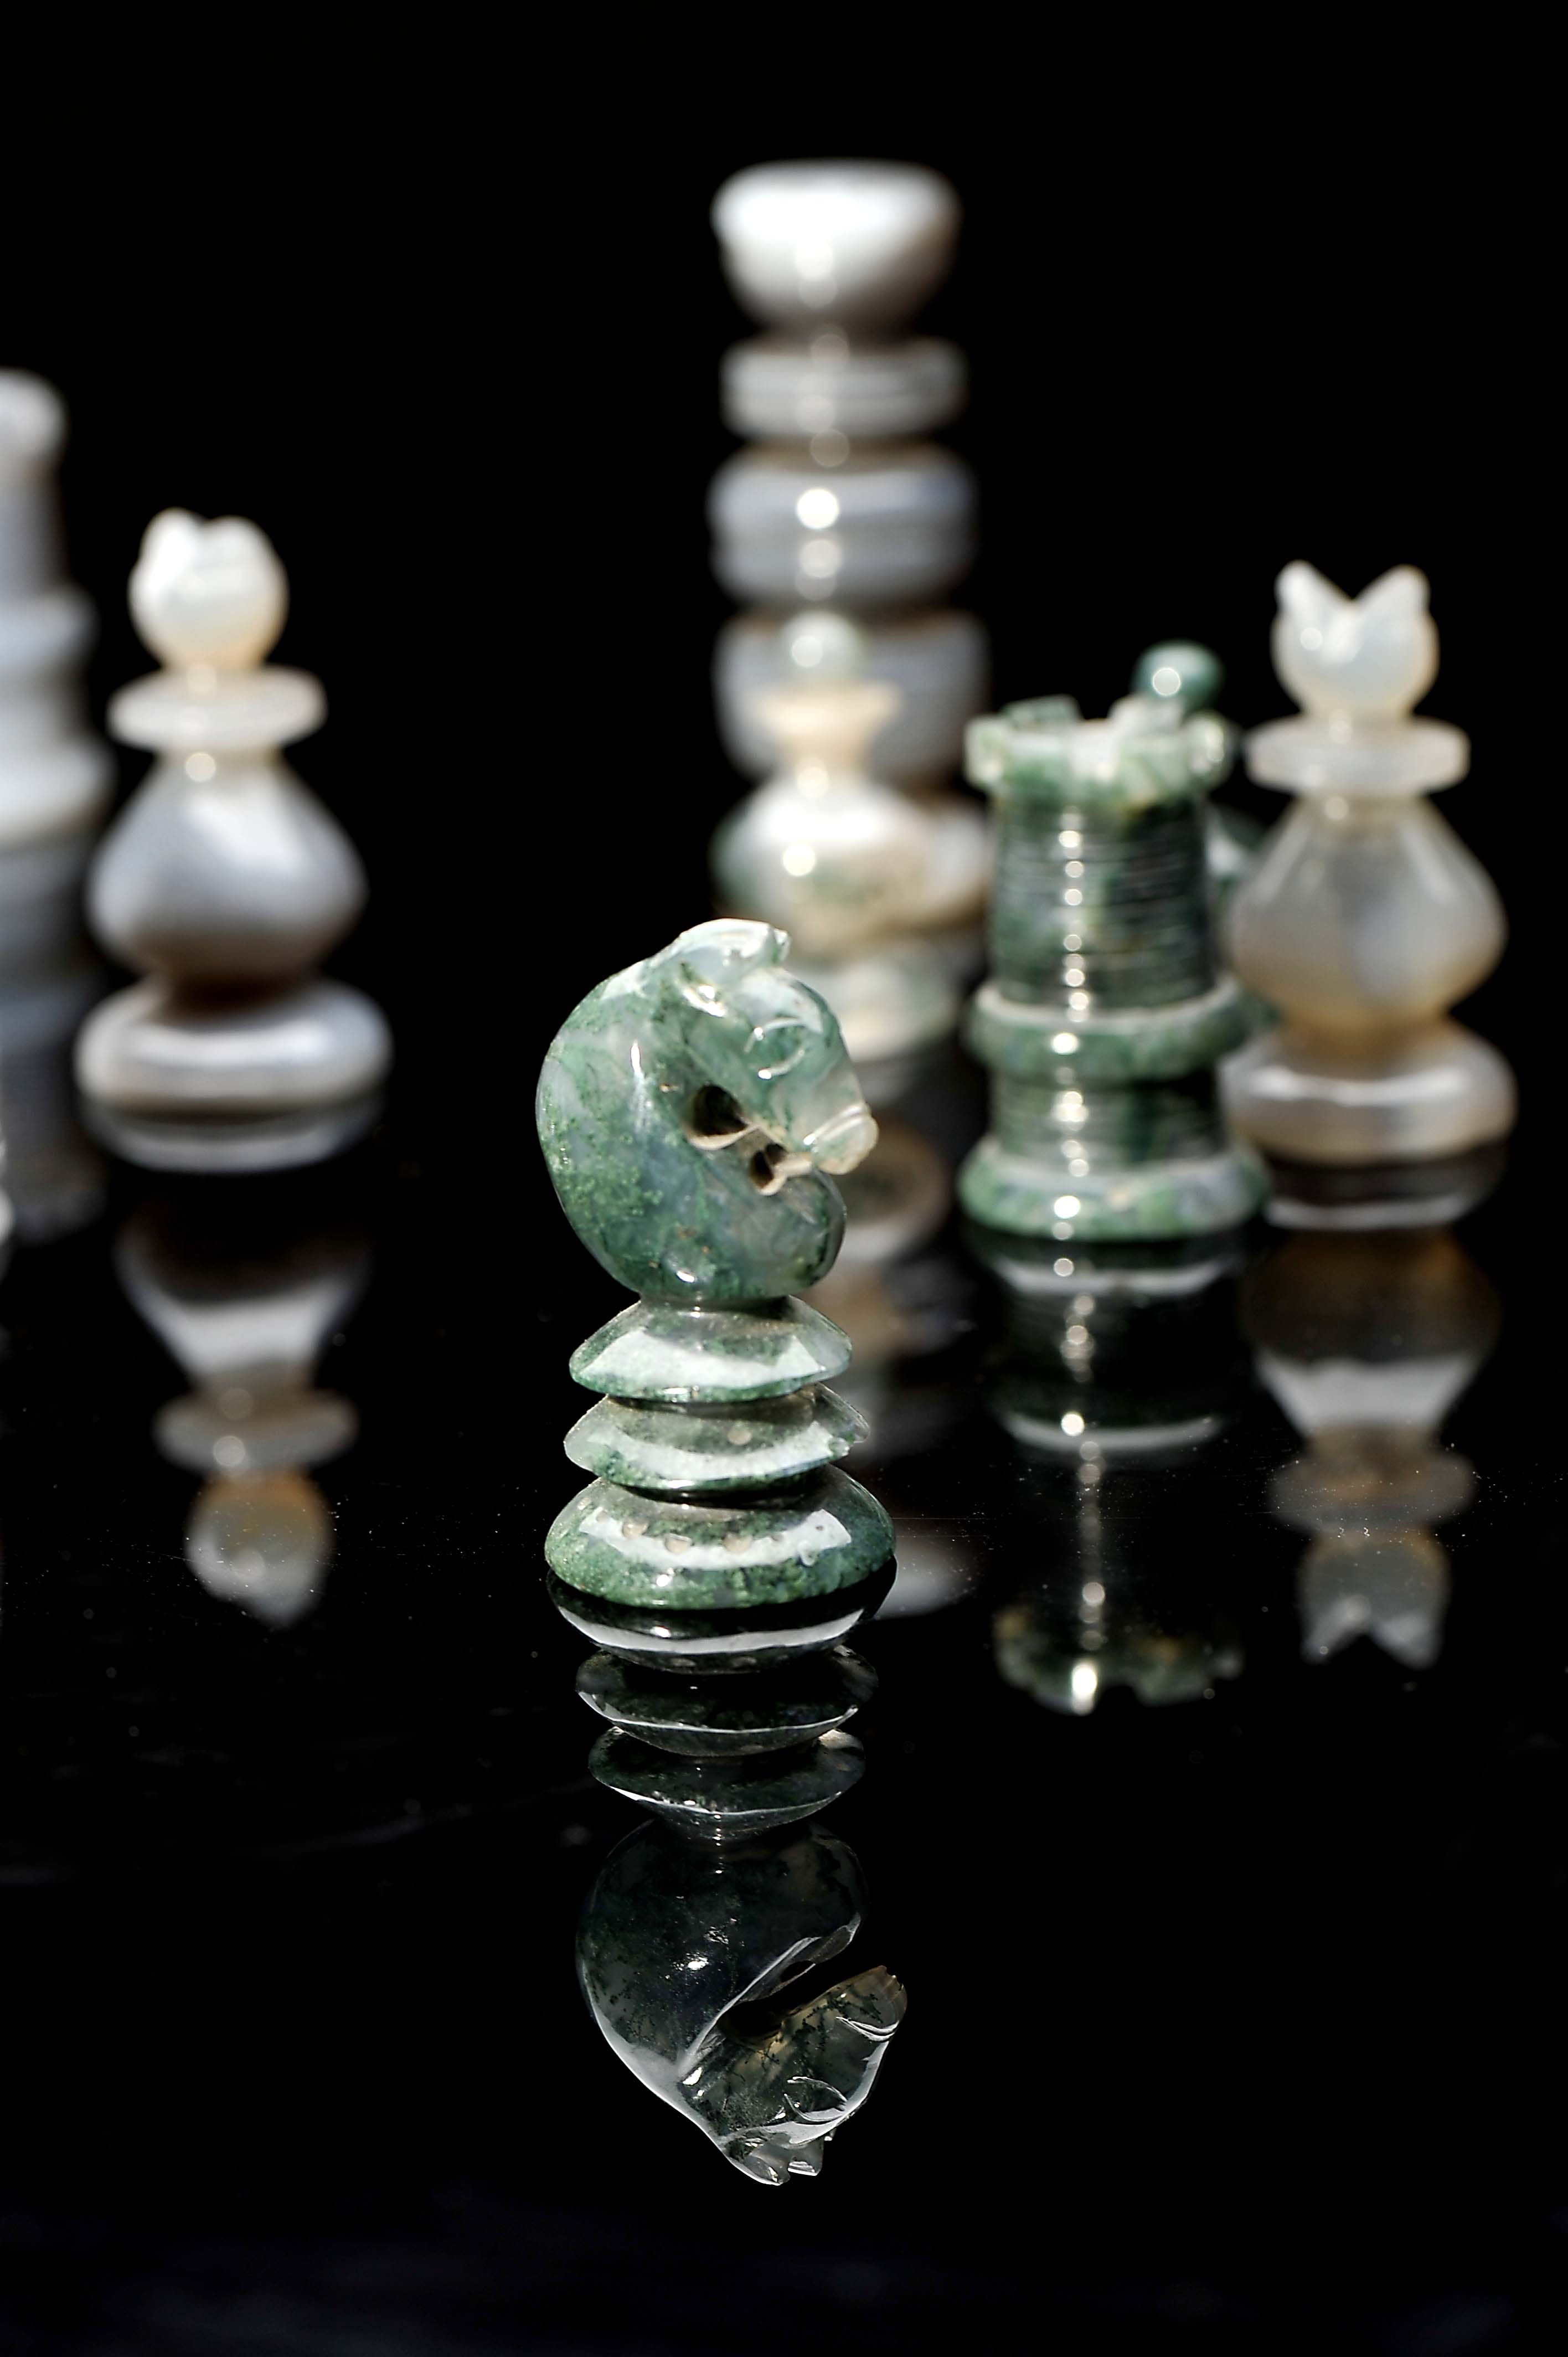 Chess pieces - Image 3 of 7